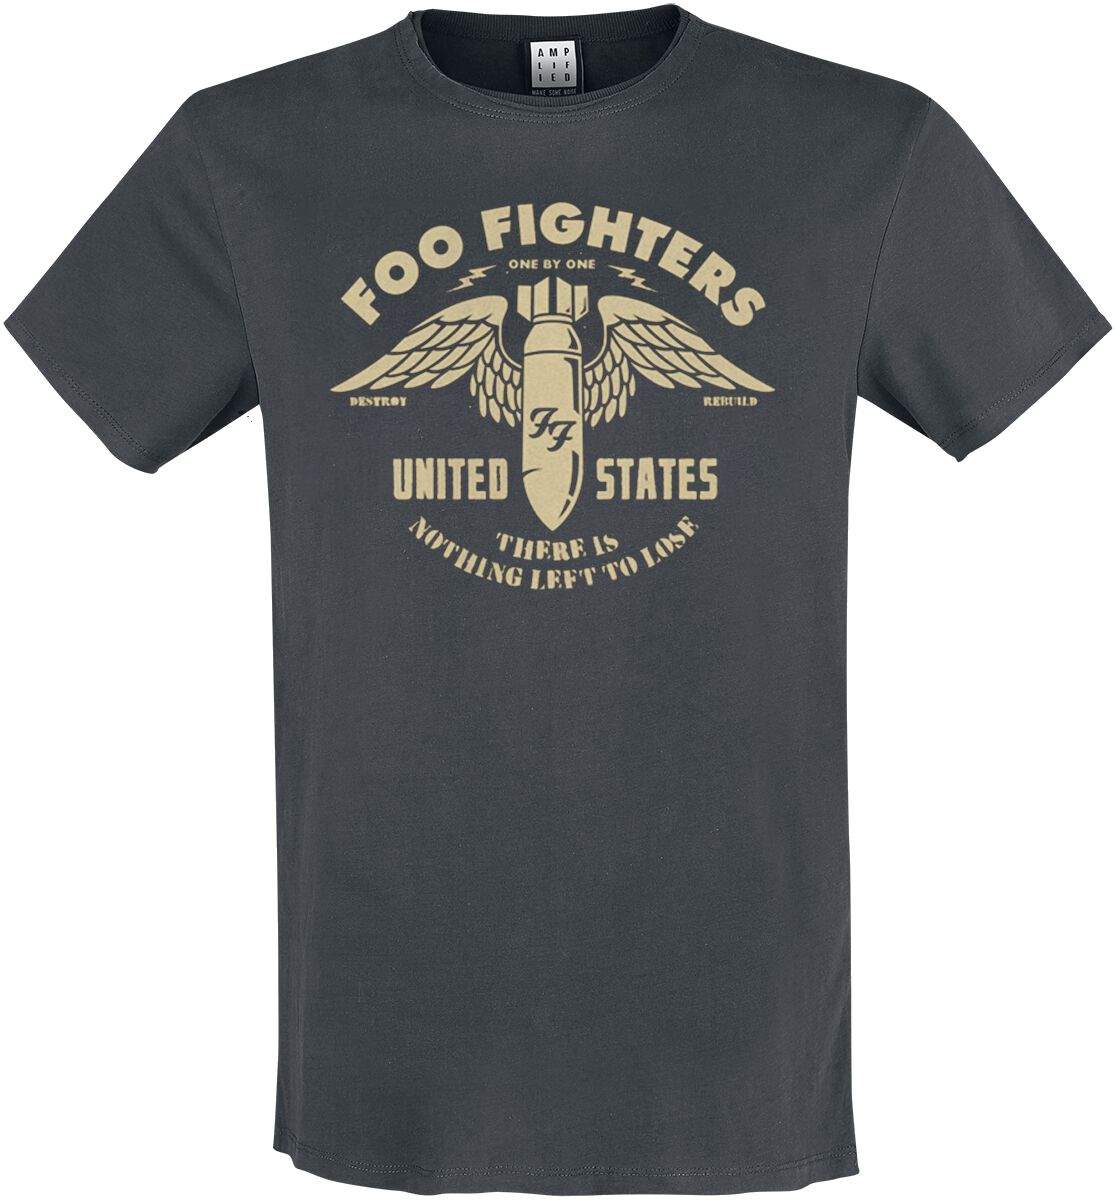 Foo Fighters Amplified Collection - One By One T-Shirt charcoal in L